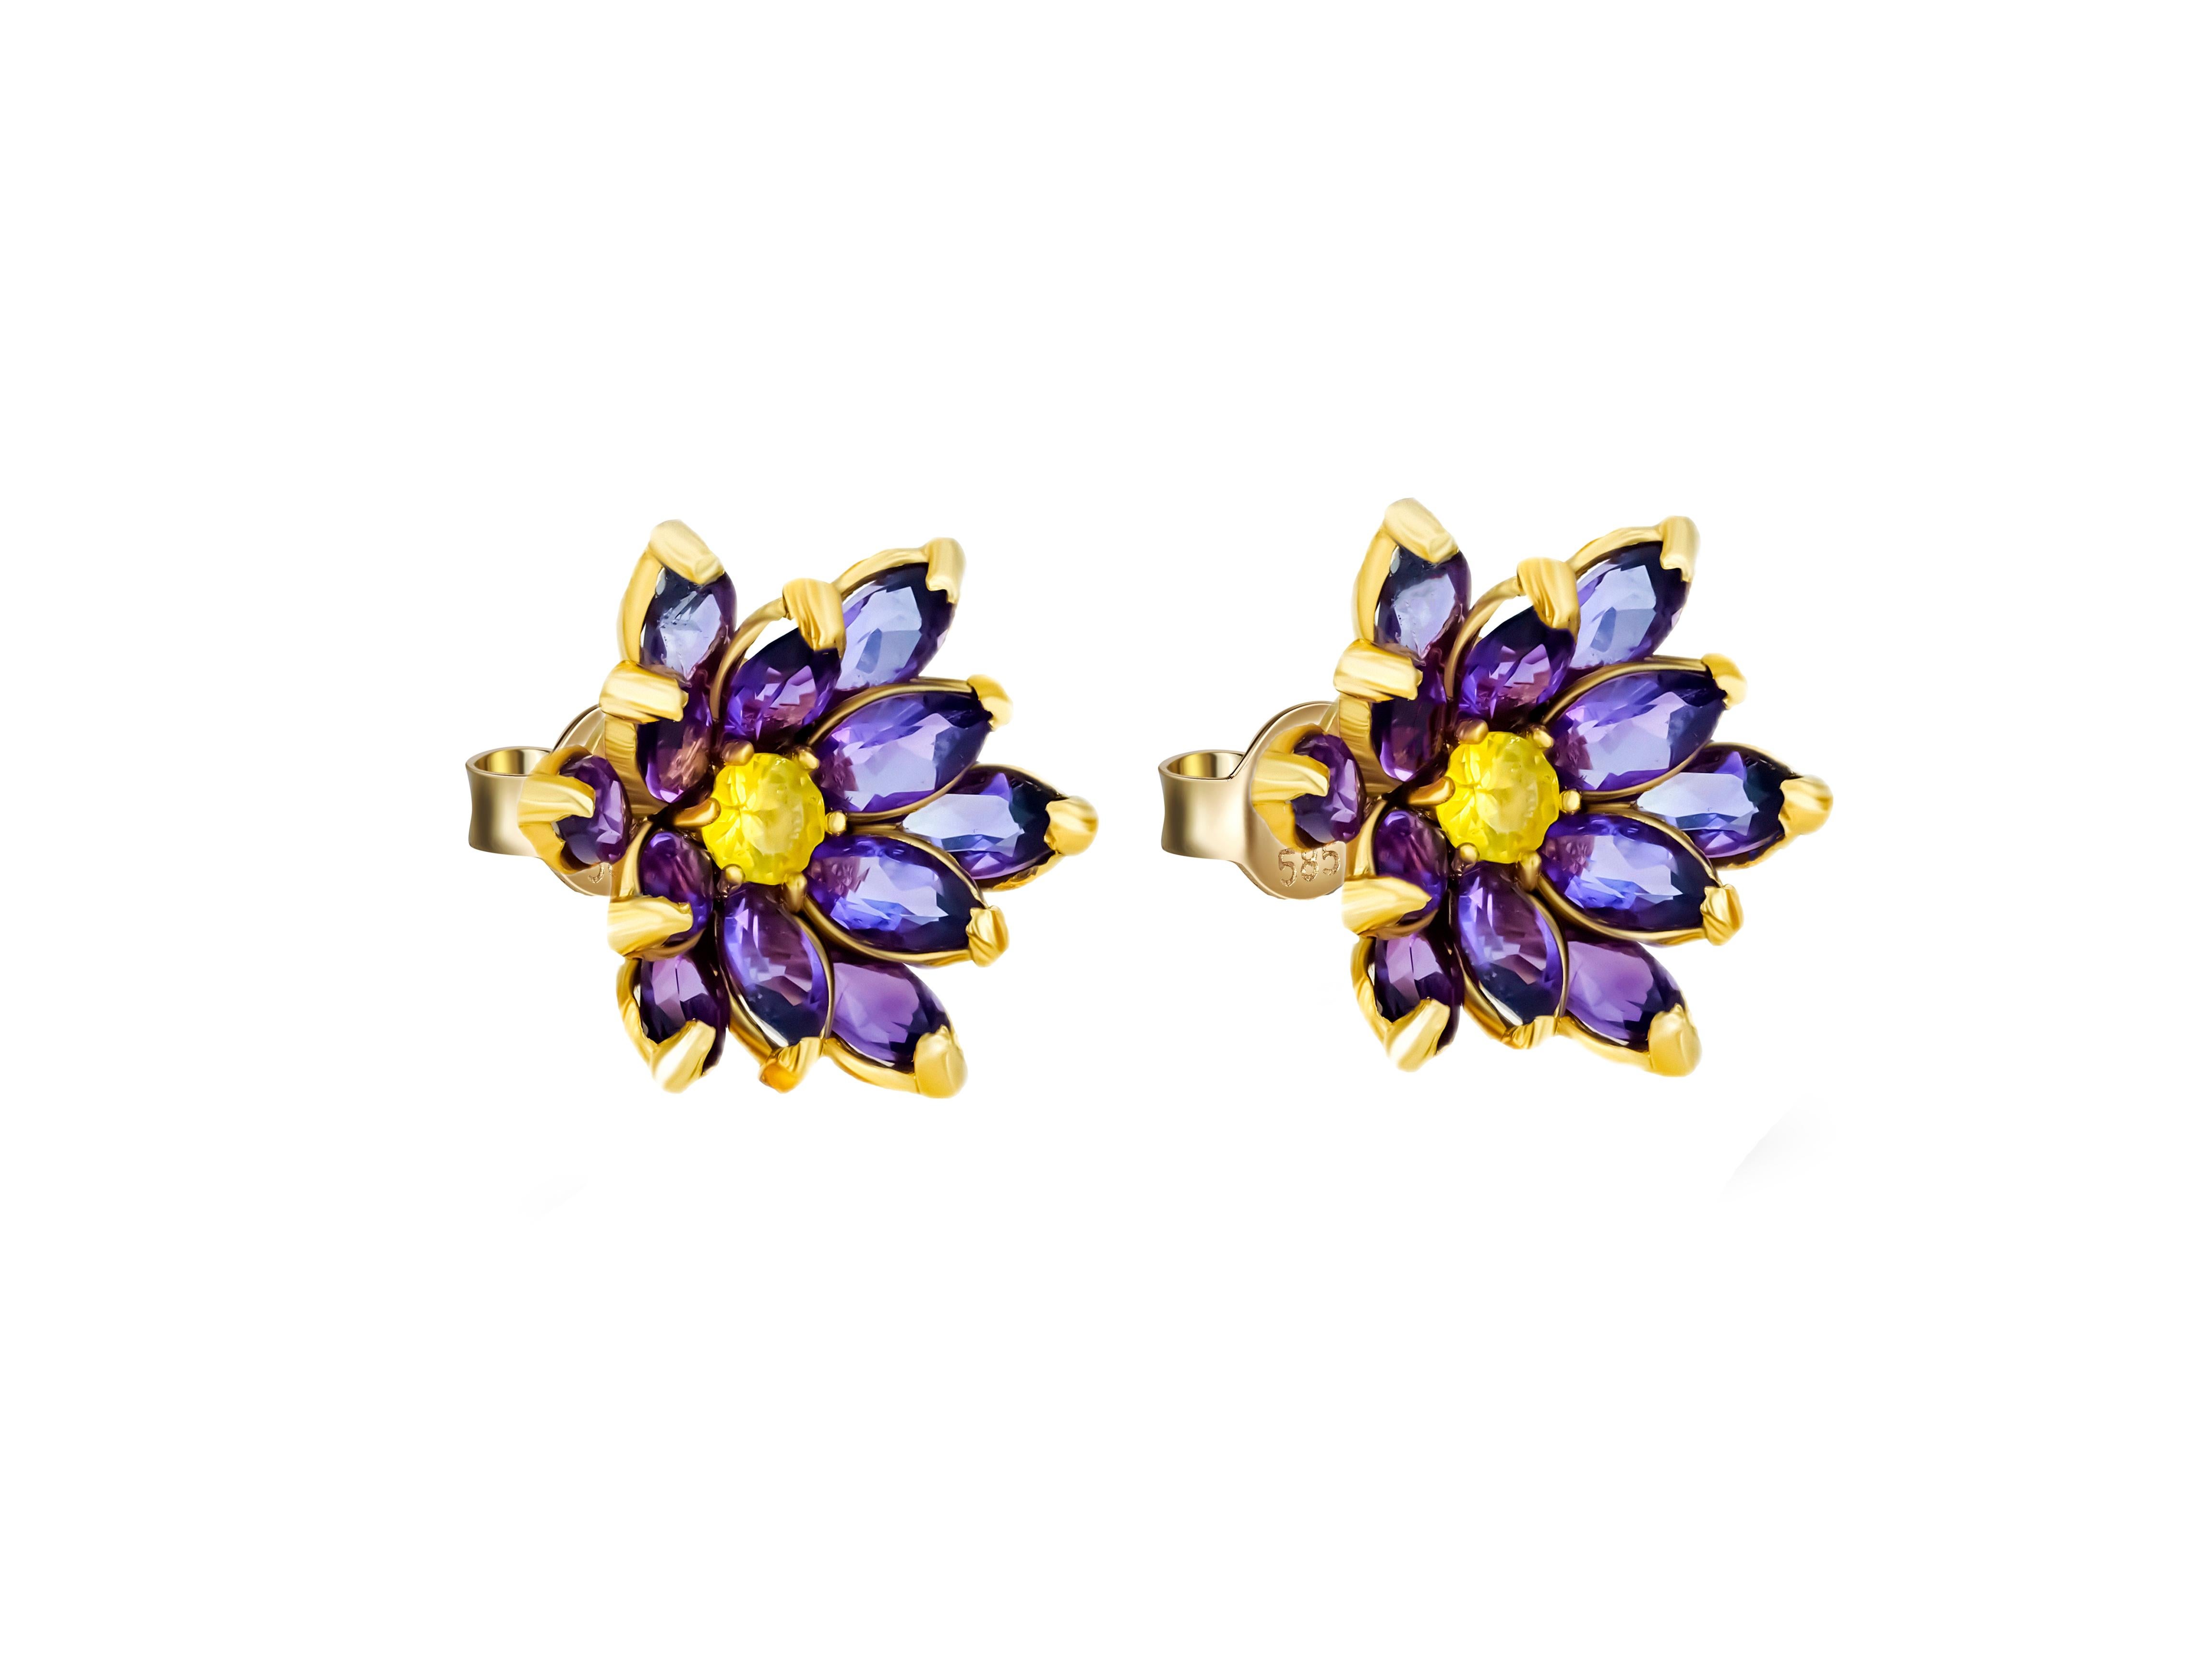 Lotus Flower Earrings Studs in 14k Gold, Amethyst and Sapphires Earrings In New Condition For Sale In Istanbul, TR